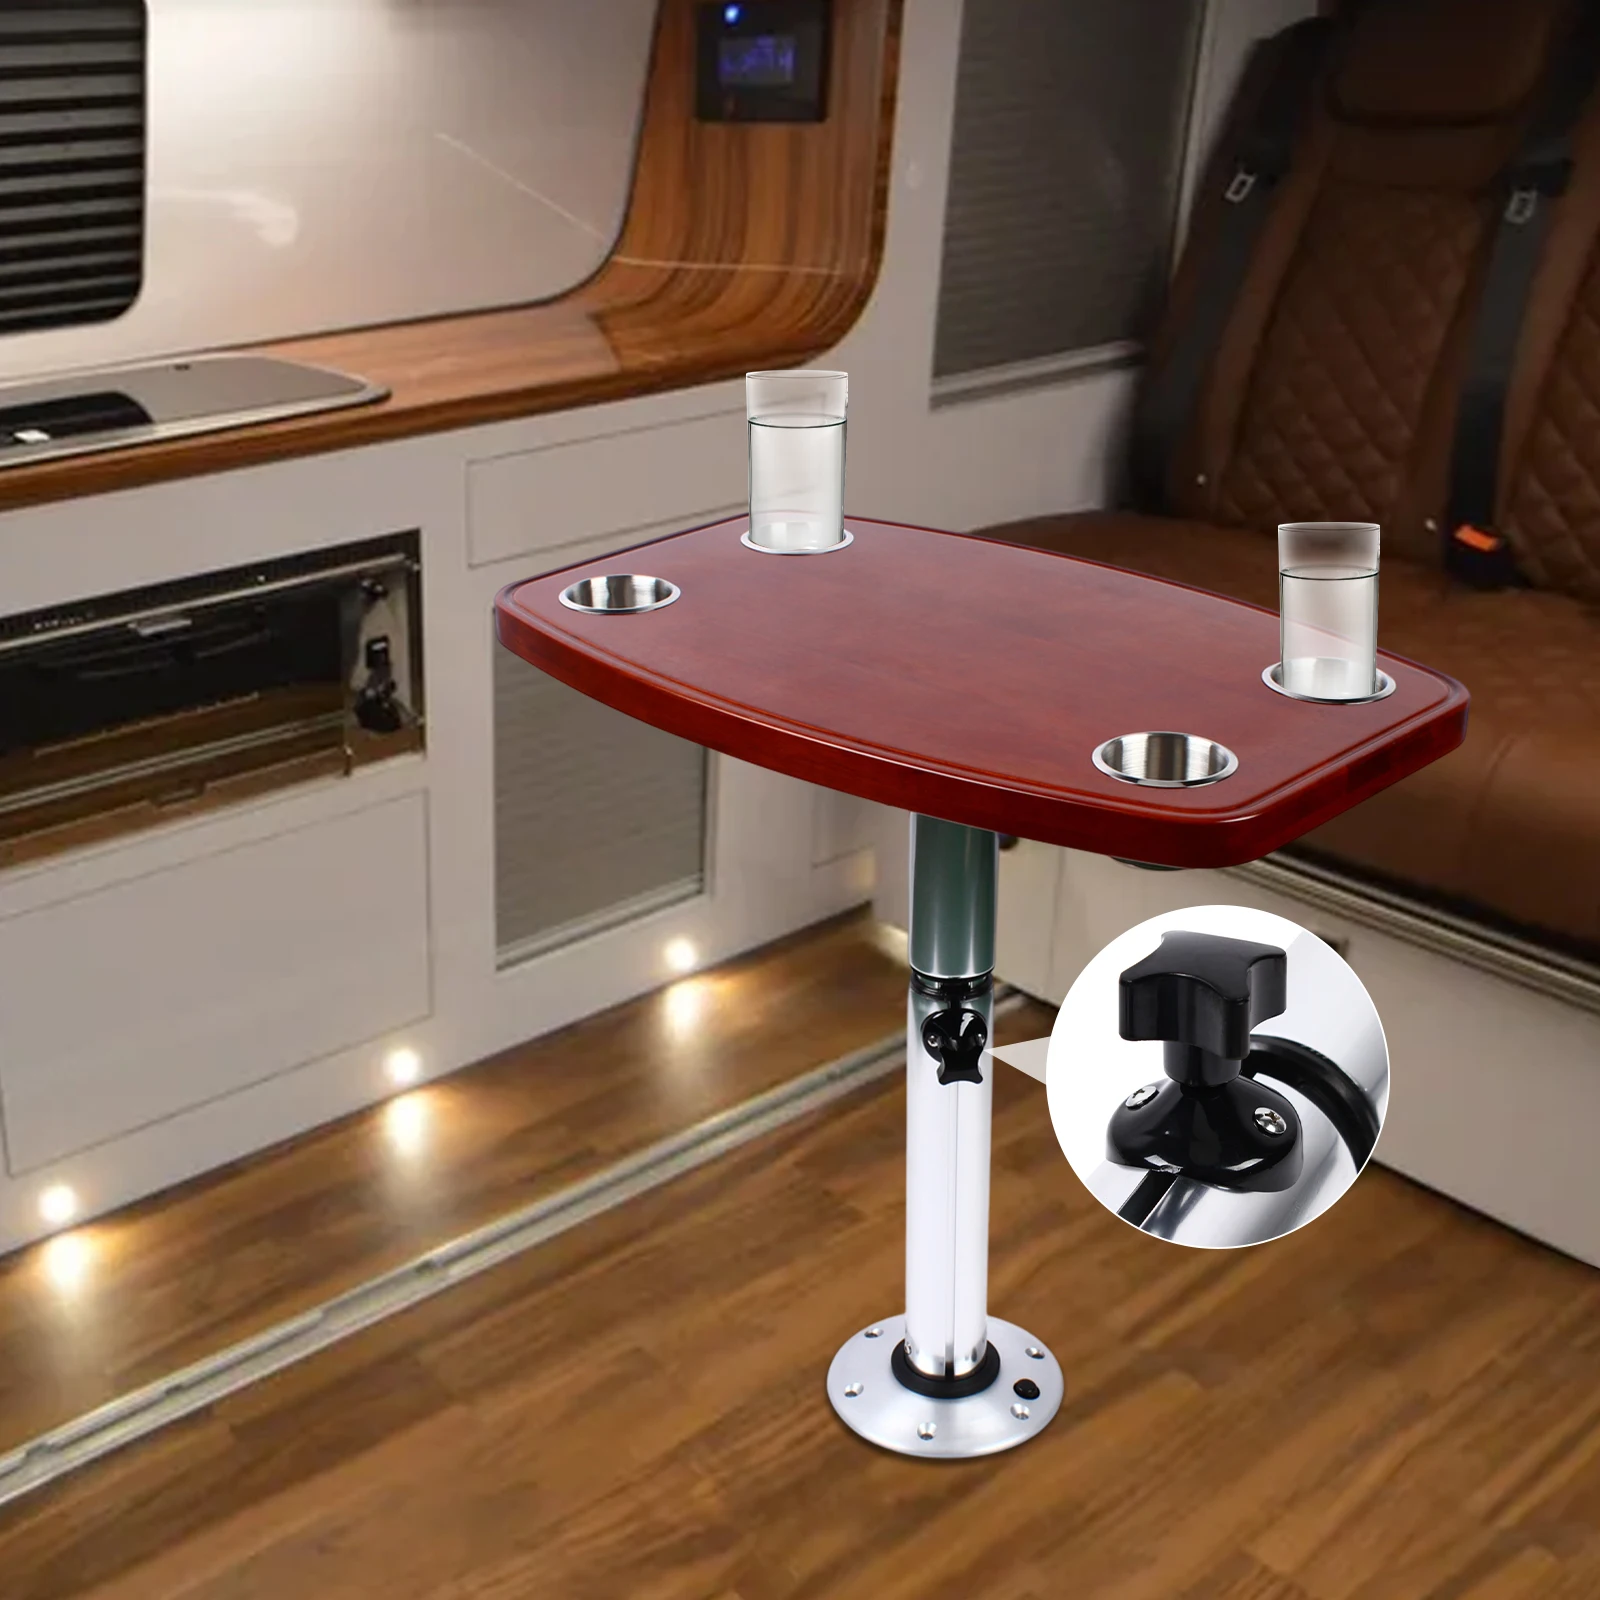 22-28inch/600x380mm RV Boat Top Removable Marine Caravan Table Pedestal elm Table Top Base w/ 4 Cup Holder